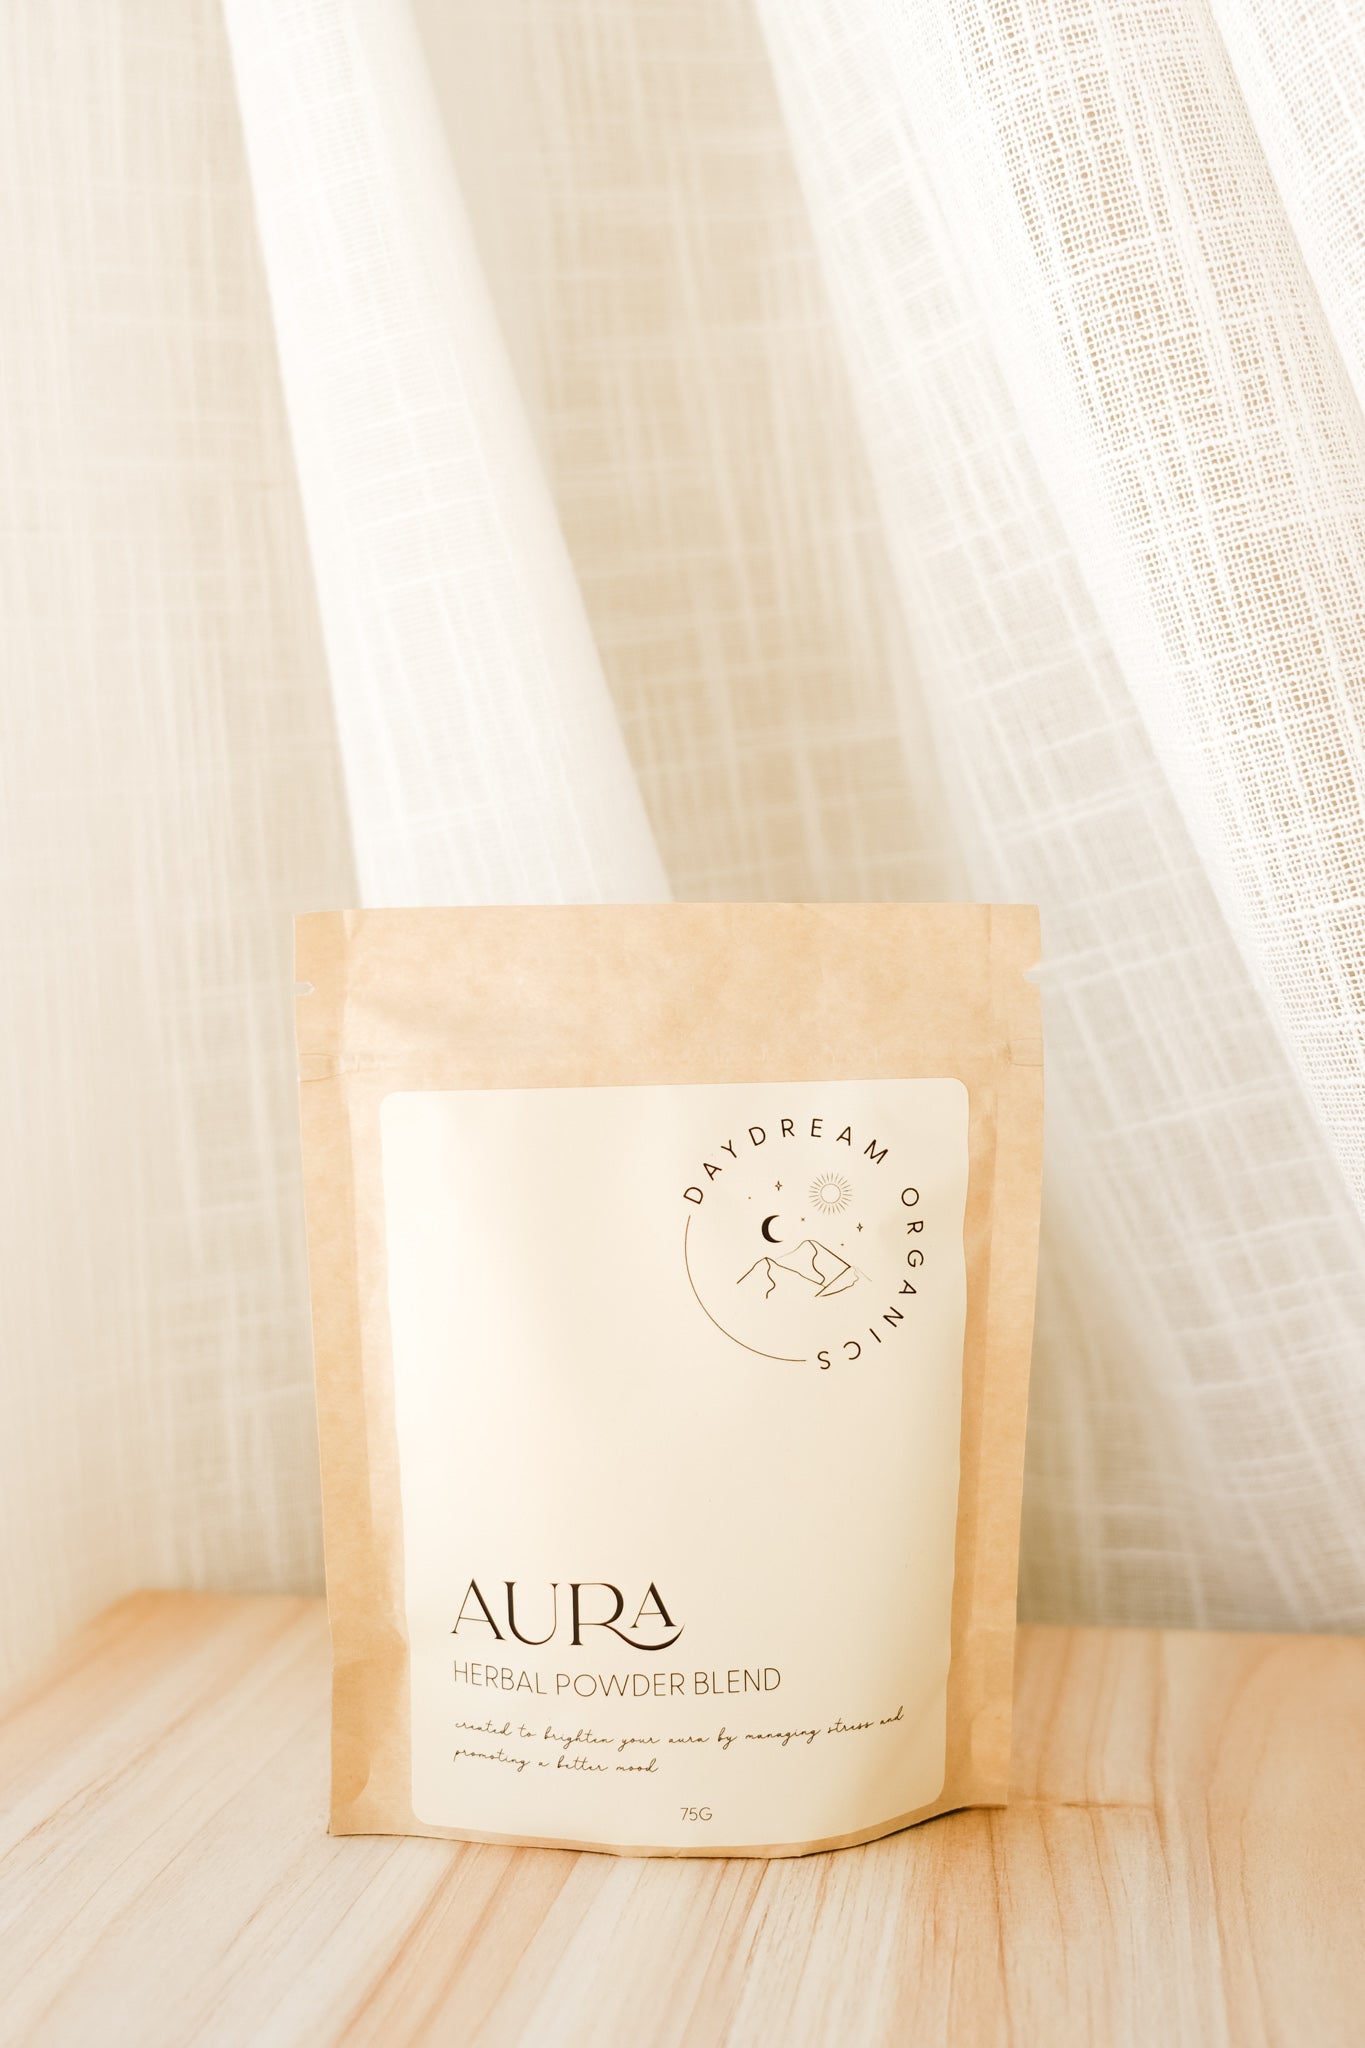 Our Aura Herbal Powder Blend is made using adaptogenic herbs to help support a balanced mood as well as healthy cortisol levels and stress responses. 